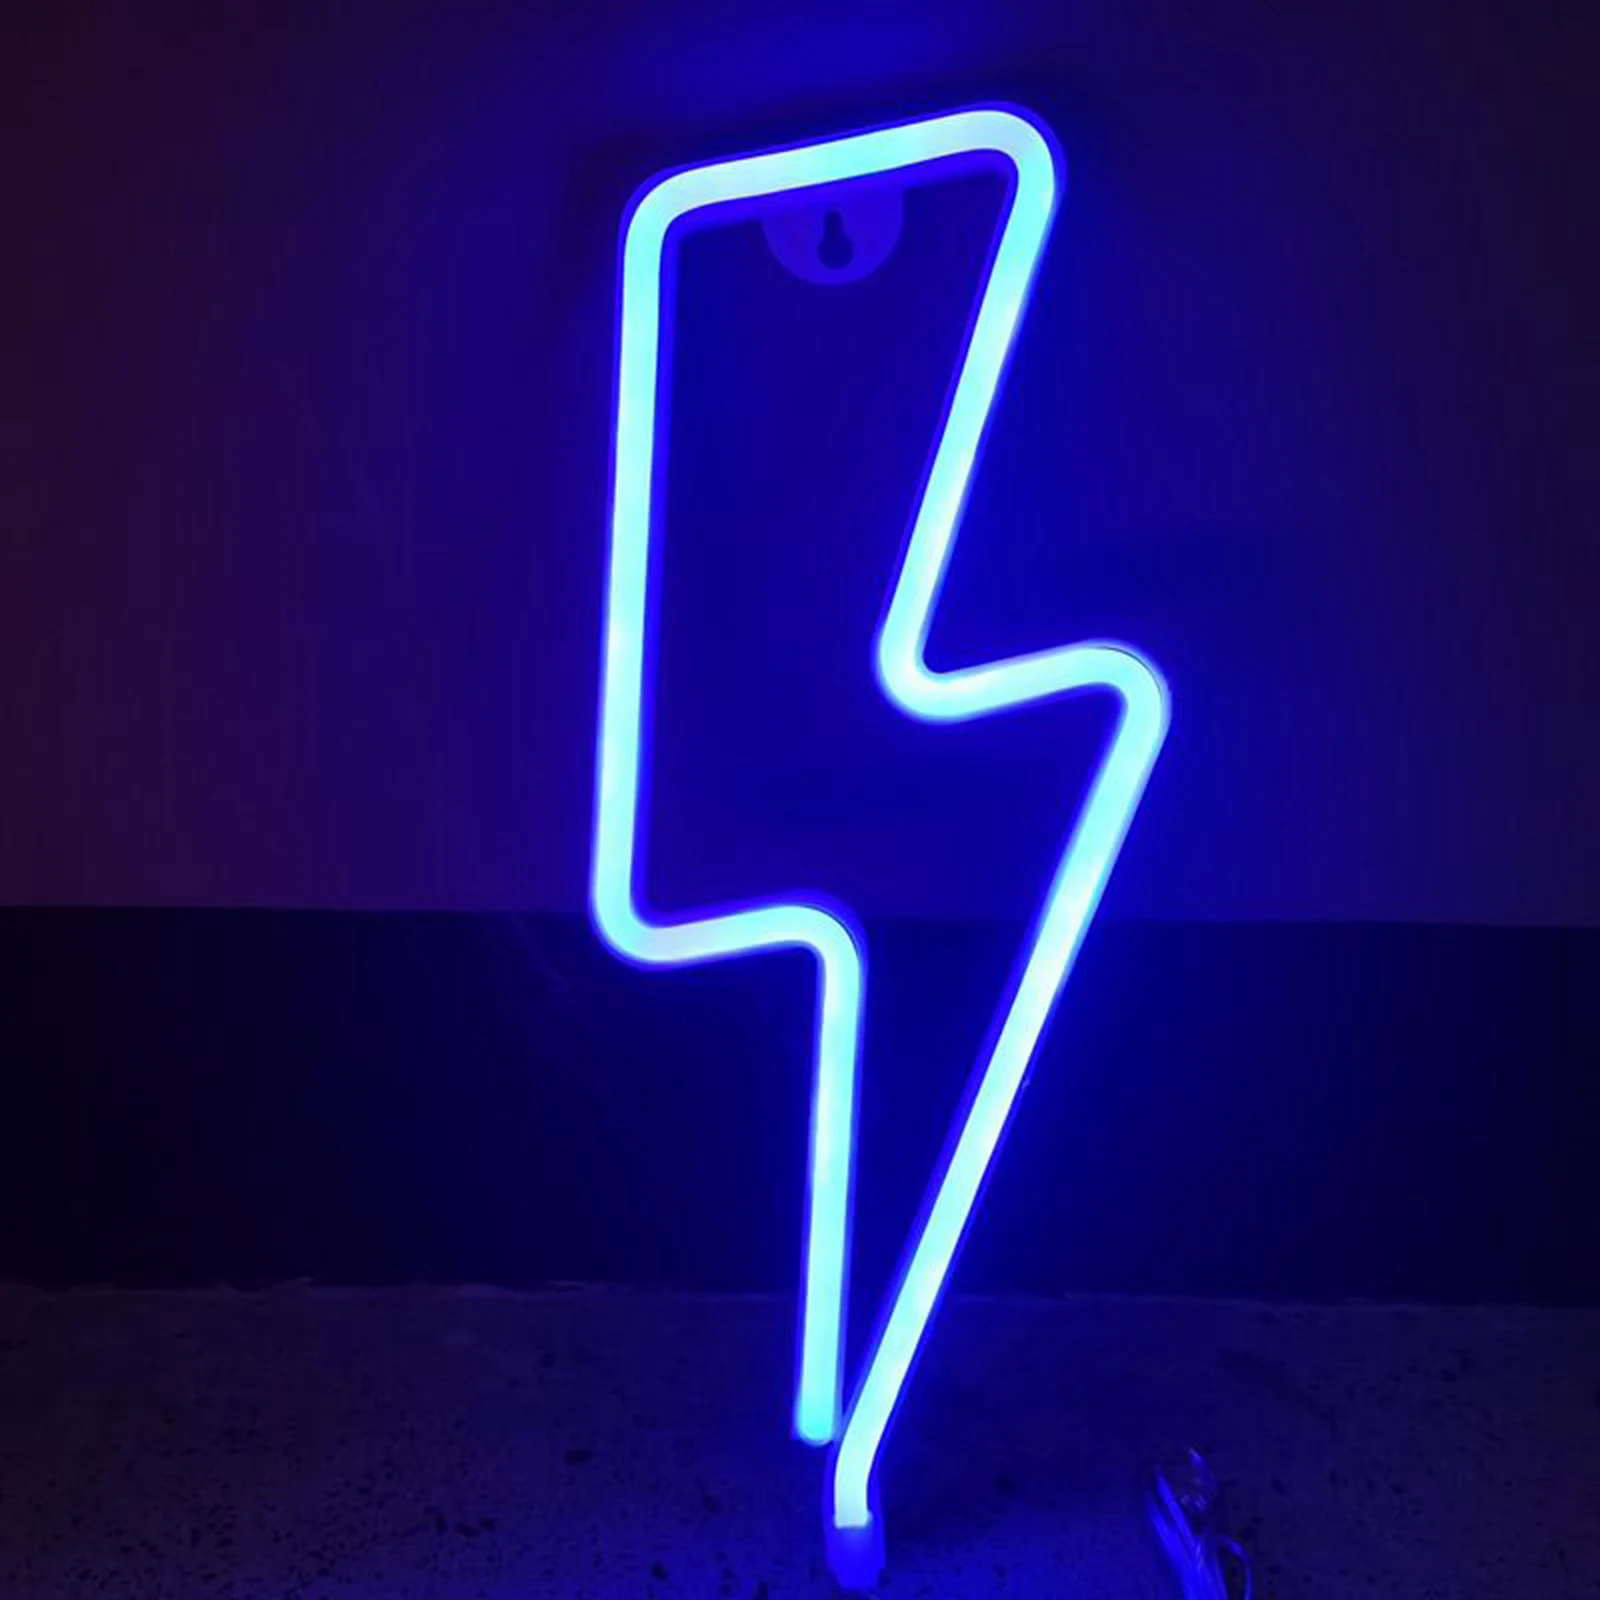 LED Home Neon Sign Lightning Shaped Wall Neon Light USB Decorative Night Light Wall Decor for Kids Baby Room Wedding Party